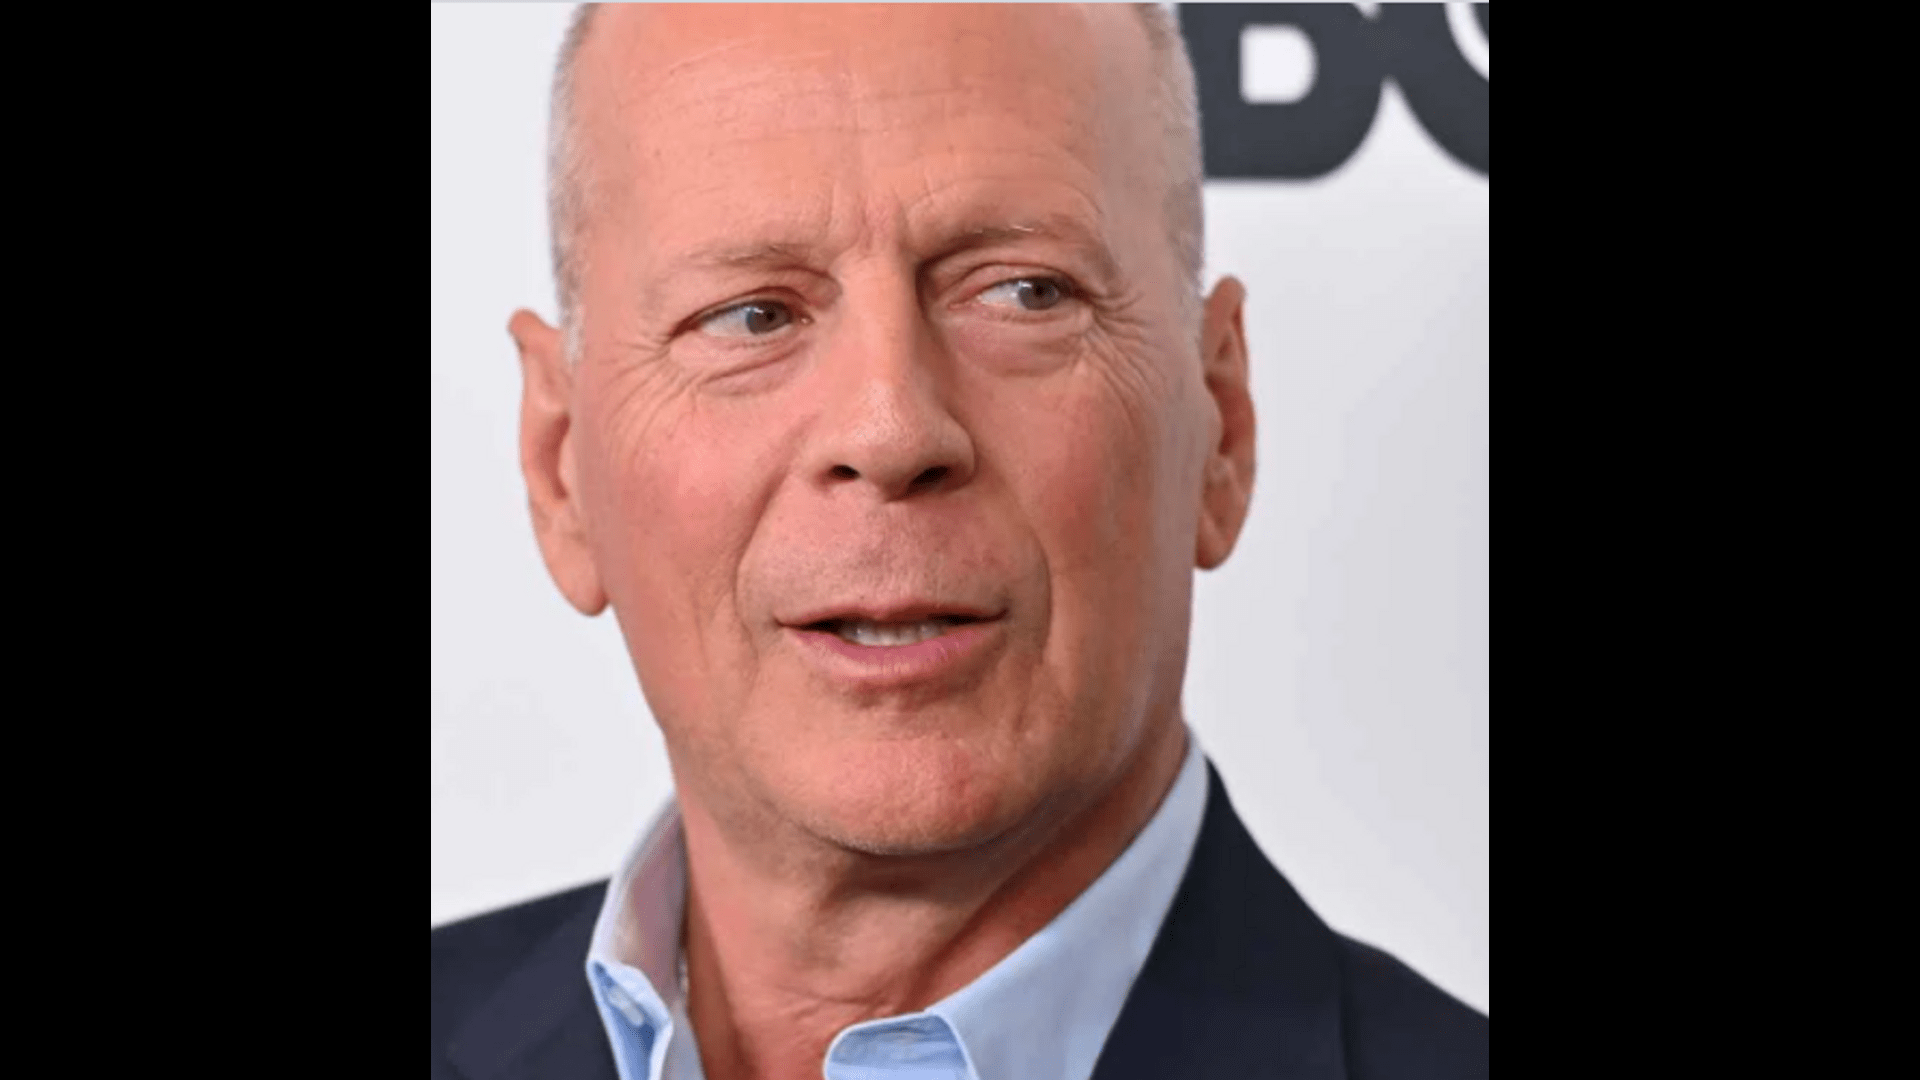 ”the-razzies-consider-removing-the-special-category-they-created-for-bruce-willis-after-his-diagnosis-of-aphasia”